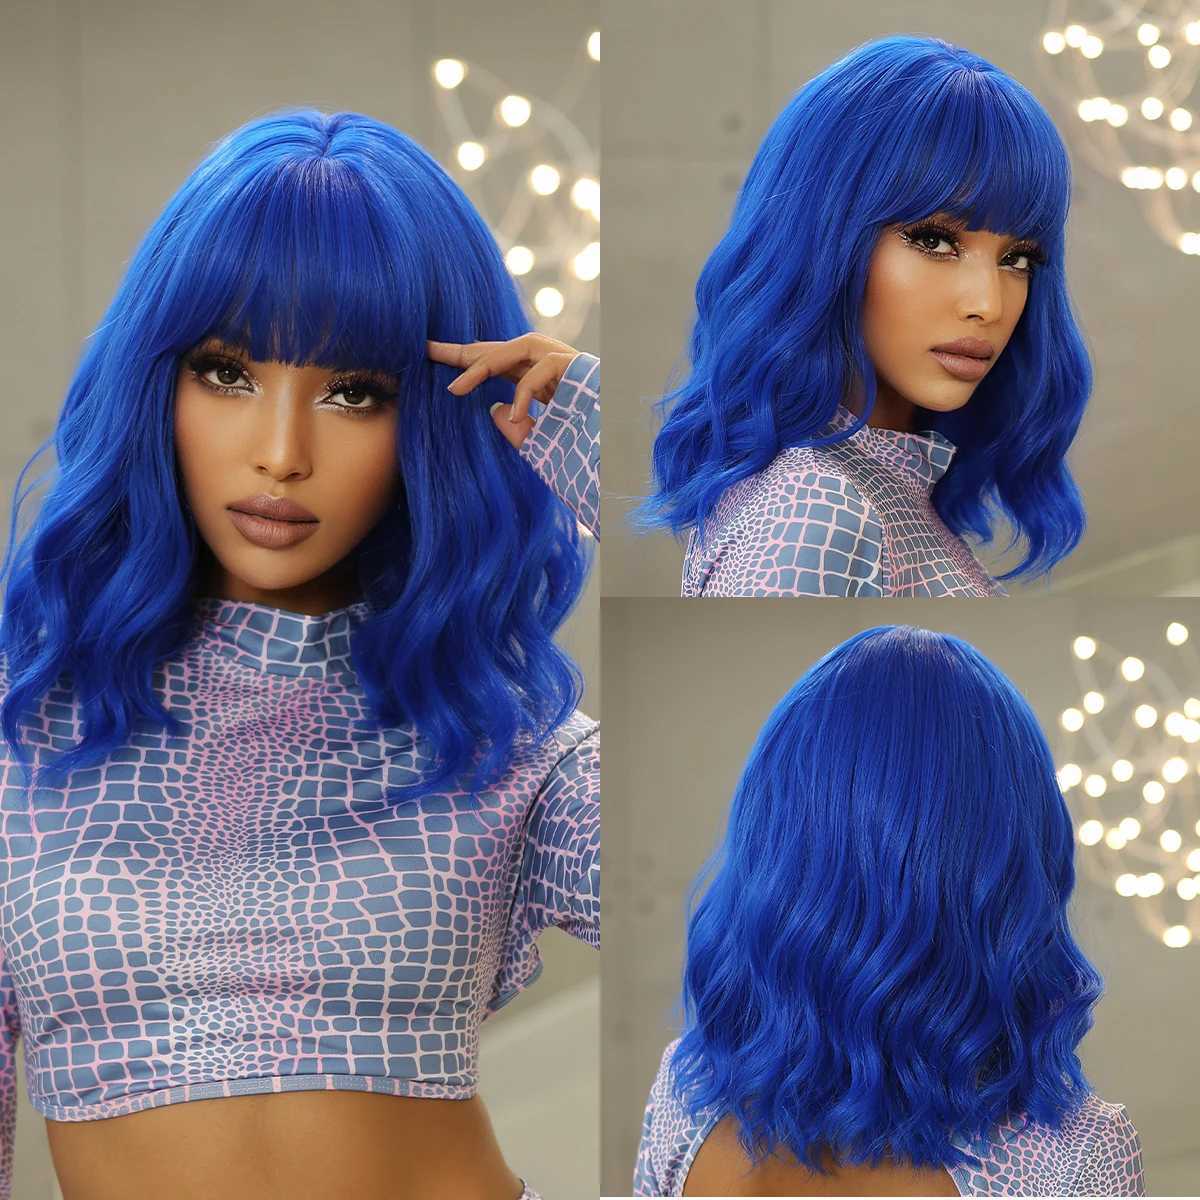 Synthetic Wigs Short Wavy Dark Blue Wig Synthetic Shoulder Long Wigs with Bangs for Women Colorful Halloween Cosplay Hair Wig Heat Resistant 240328 240327